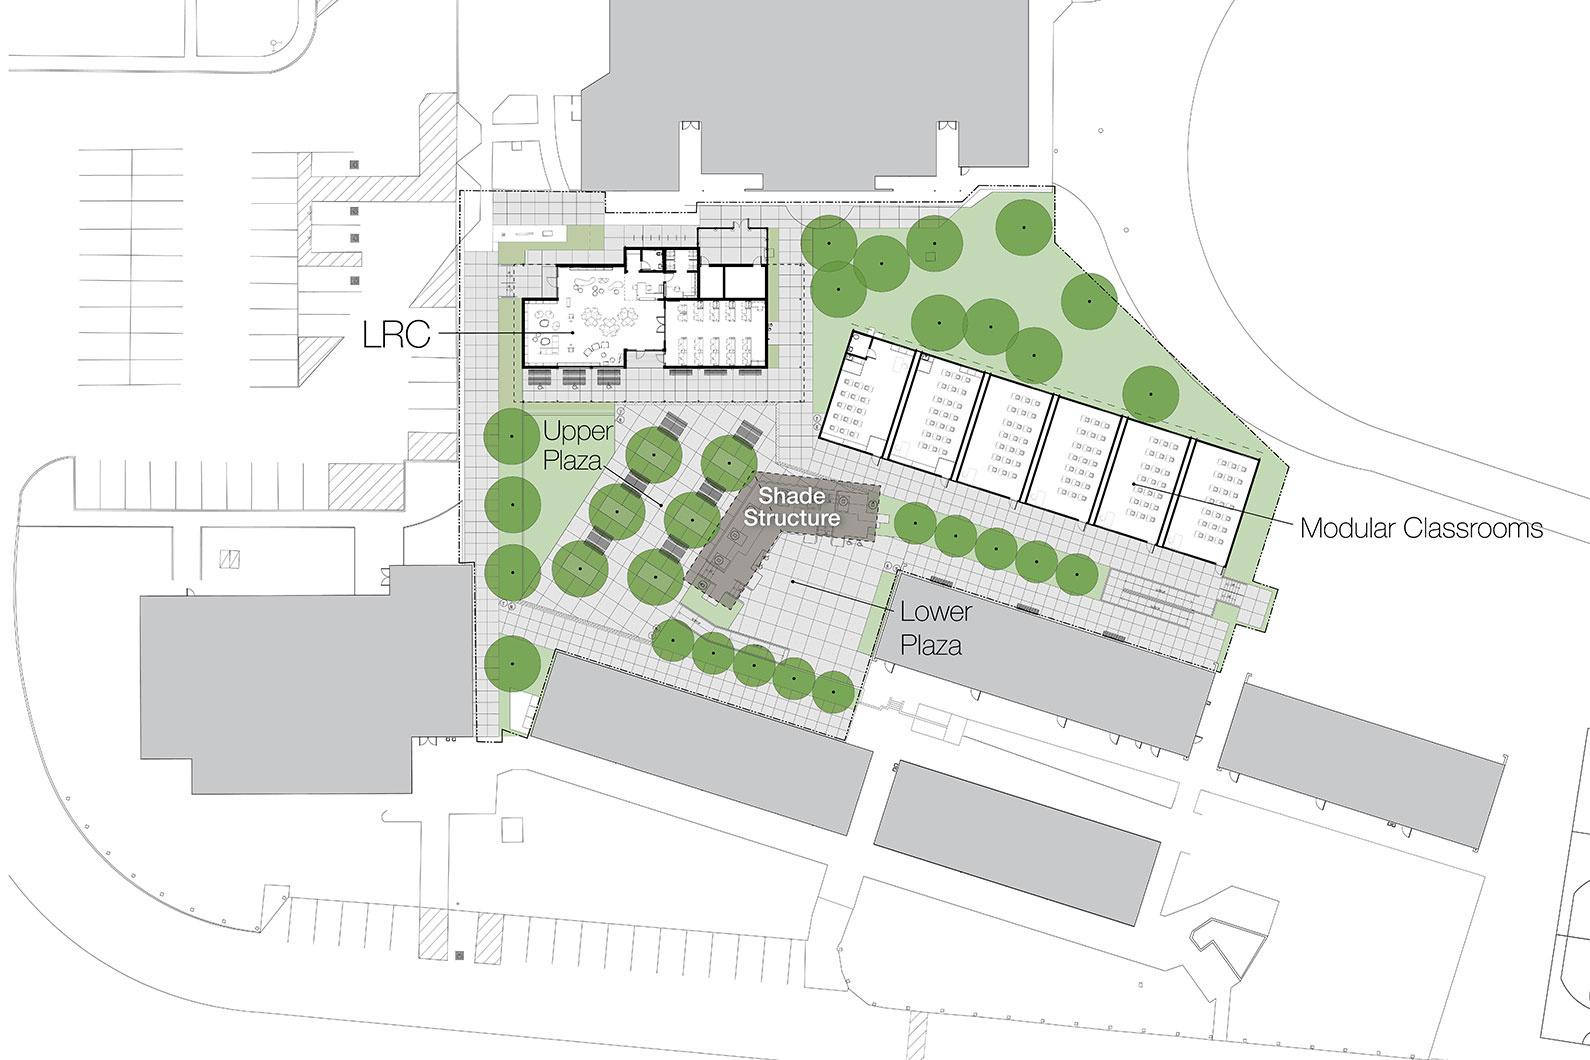 Site plan of Terrace Middle School Learning Resource Center